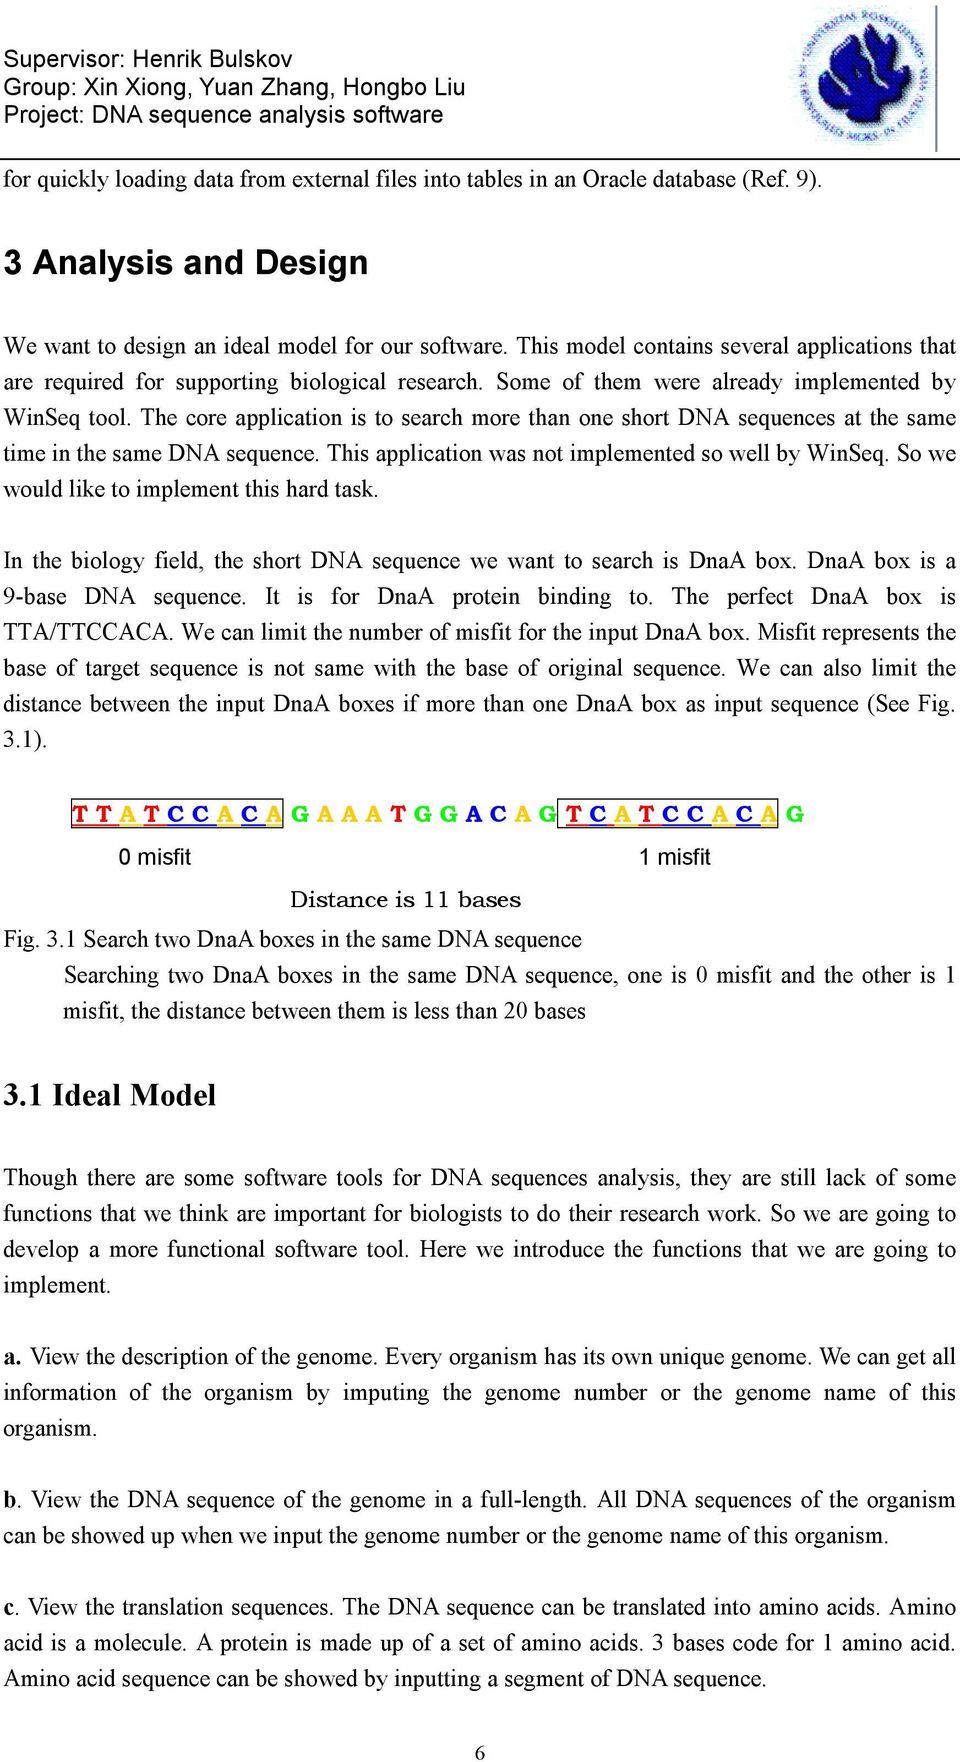 Dna Sequence Analysis Software Pdf